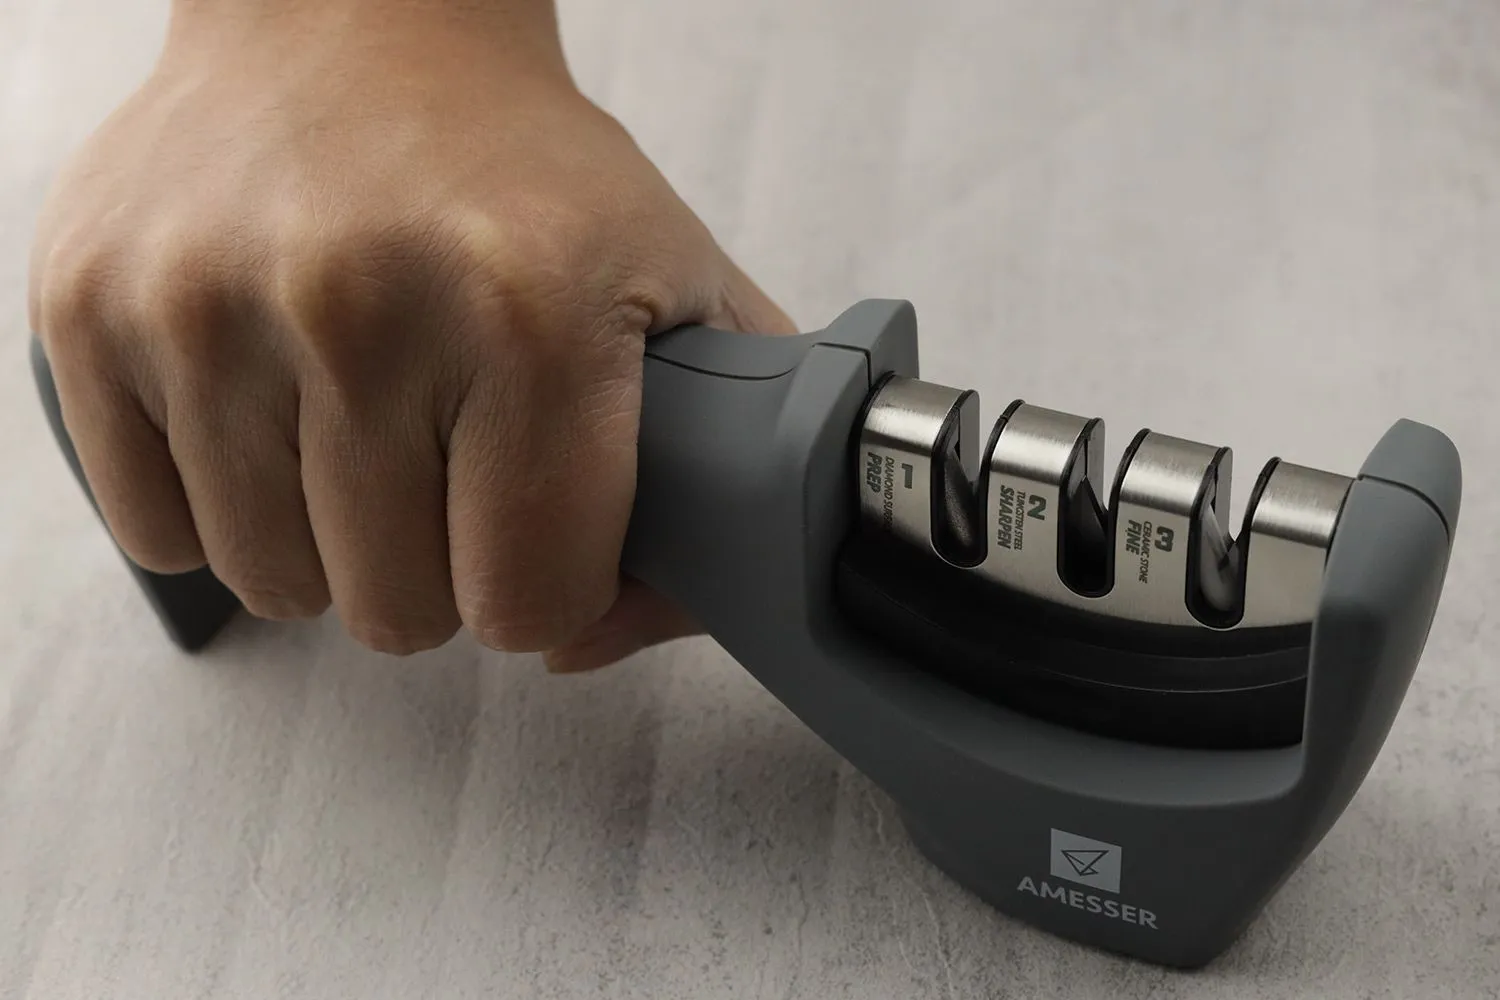 Amesser A-65 Manual Knife Sharpener In-depth Review - Healthy Kitchen 101